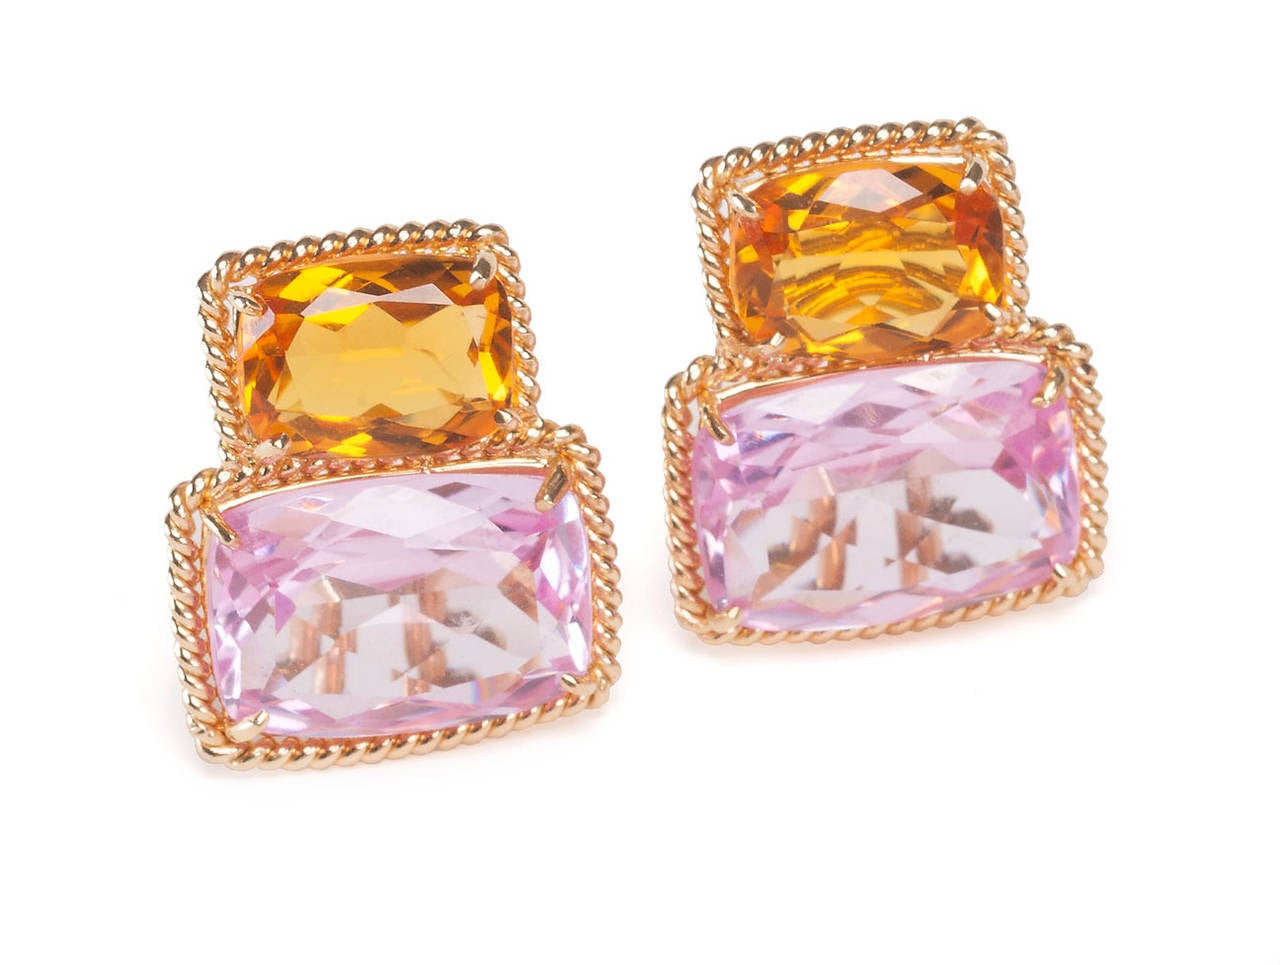 18kt yellow gold two stone earrings with rope twist border with faceted citrine and pink topaz.

Posted earrings with omega clip backs.
Can be made clip for non-pierced ears.

Citrine stone measures .5" wide, pink topaz measures .75"